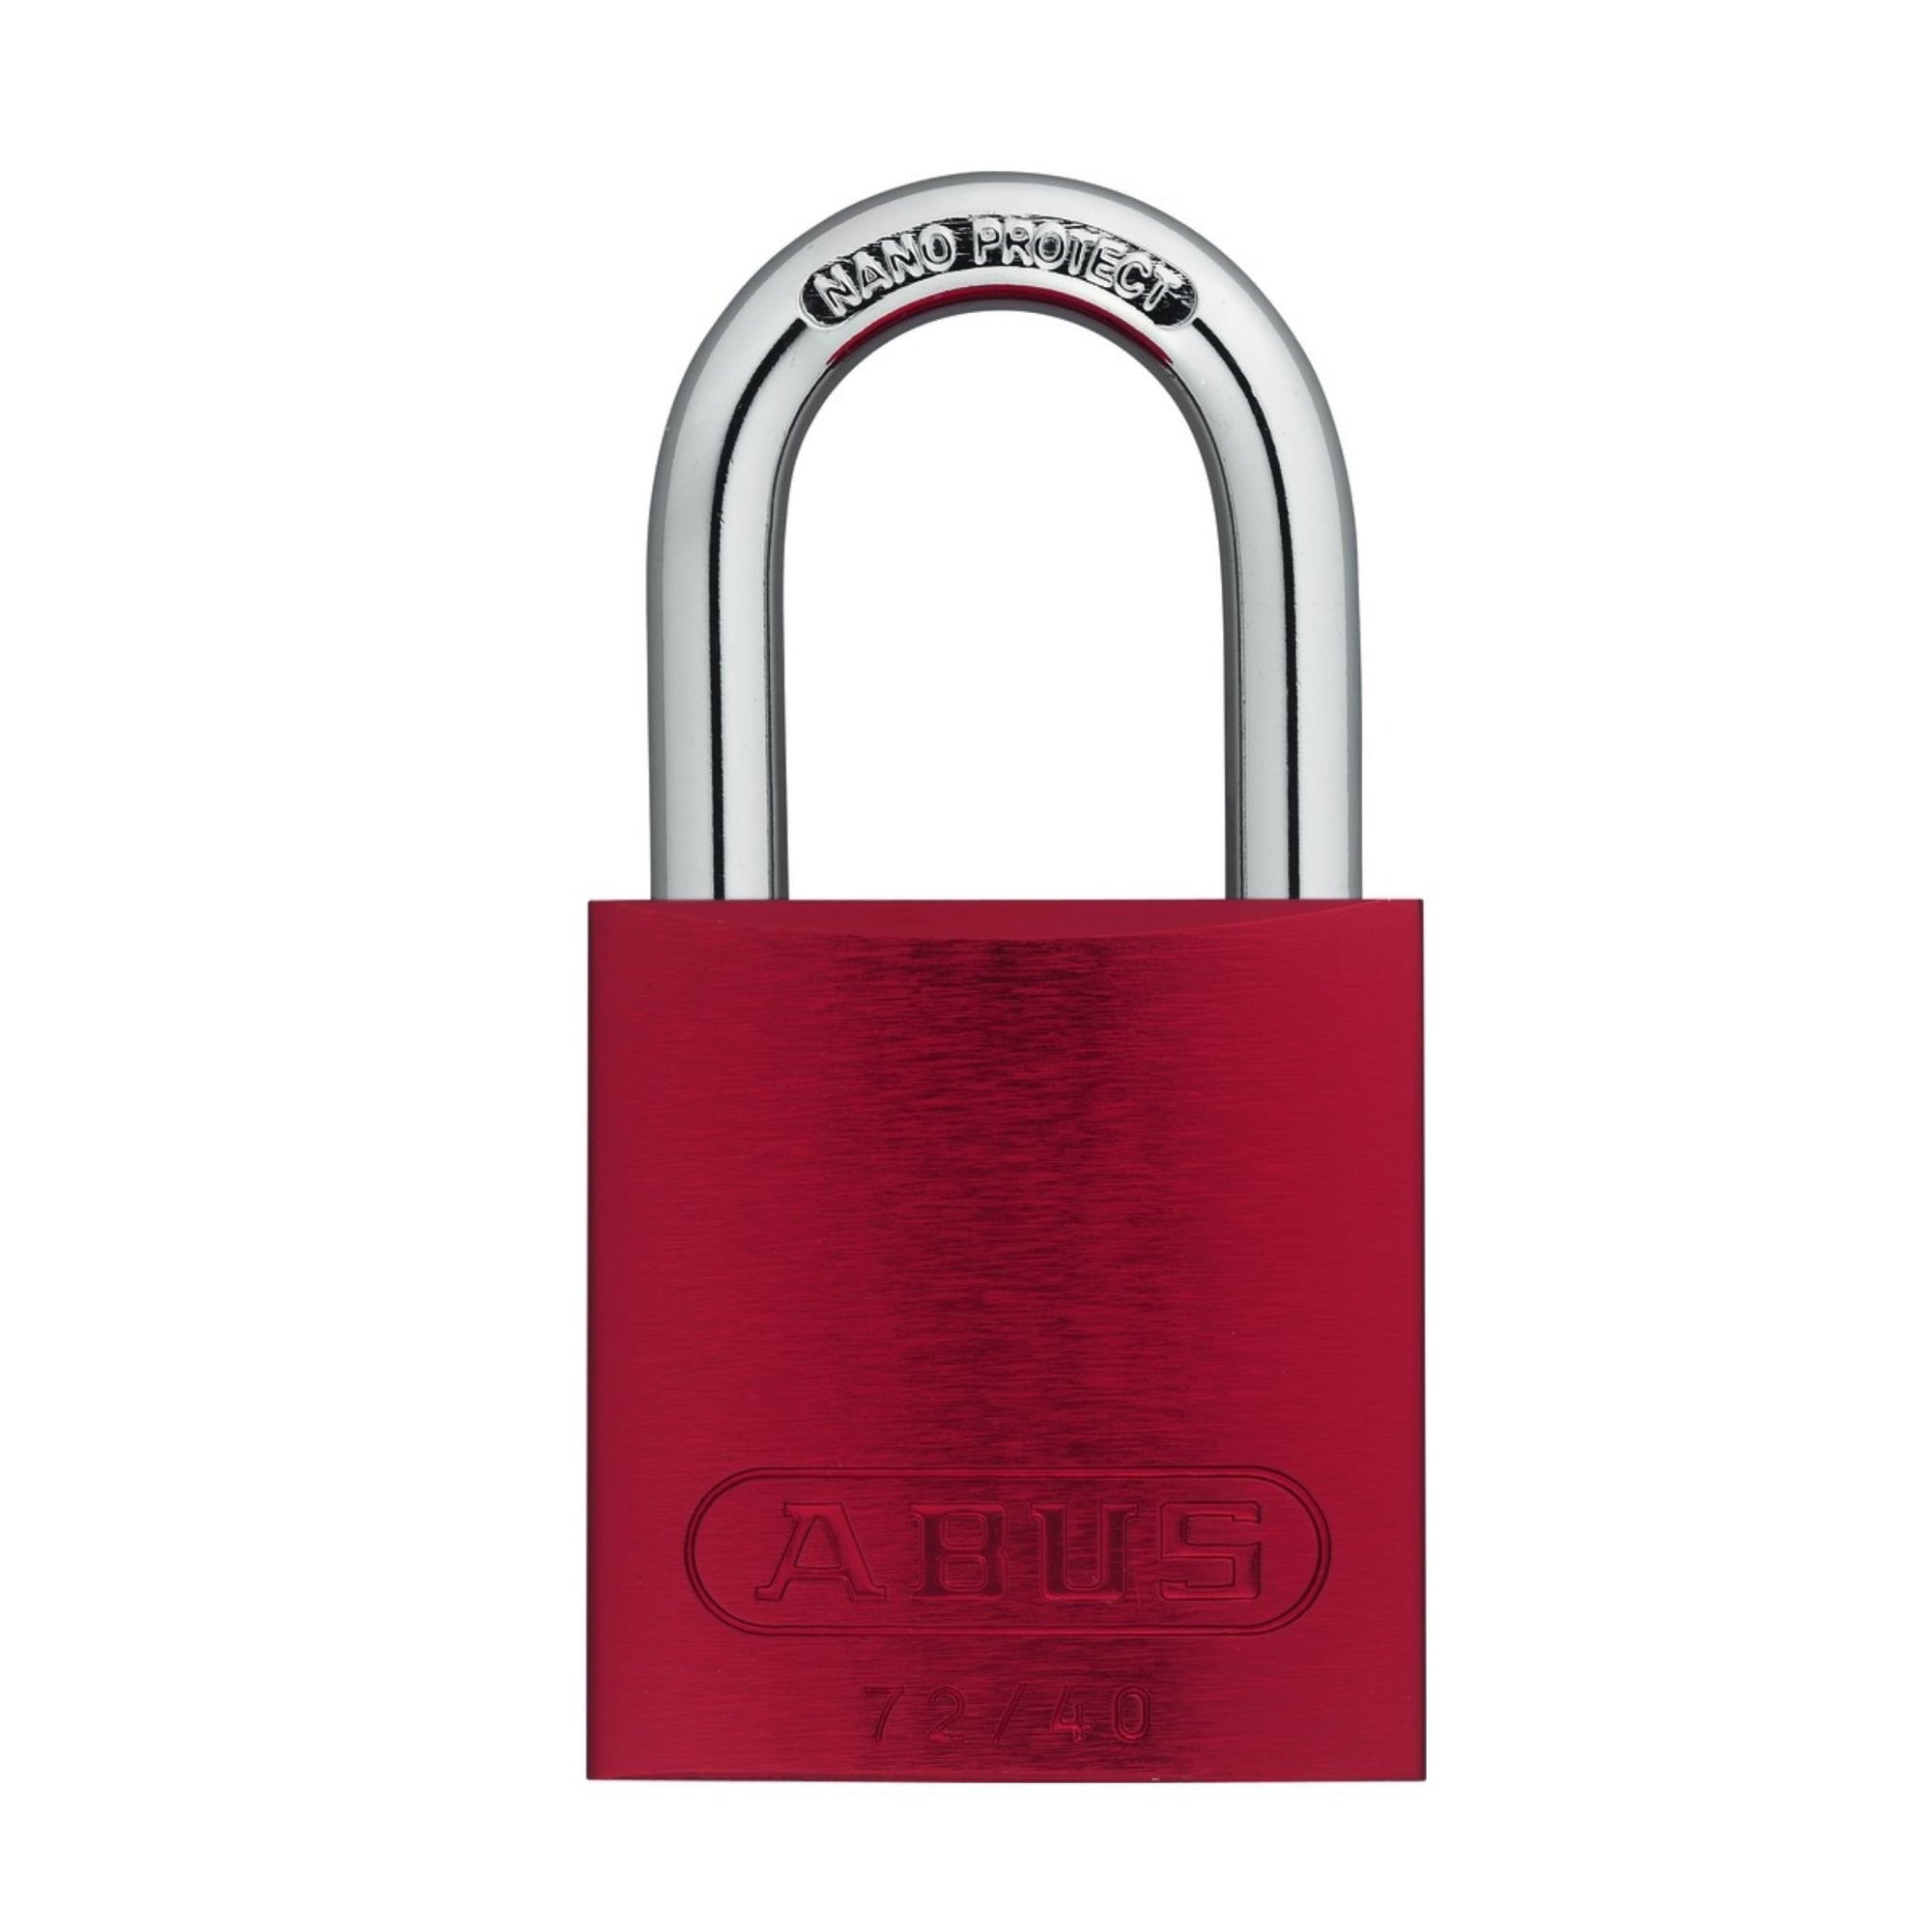 Abus 72/40 KA TT00036 Red Titalium Safety Padlock with 1-Inch Shackle, Keyed Alike to Match Existing Key Number KATT00036 - The Lock Source 